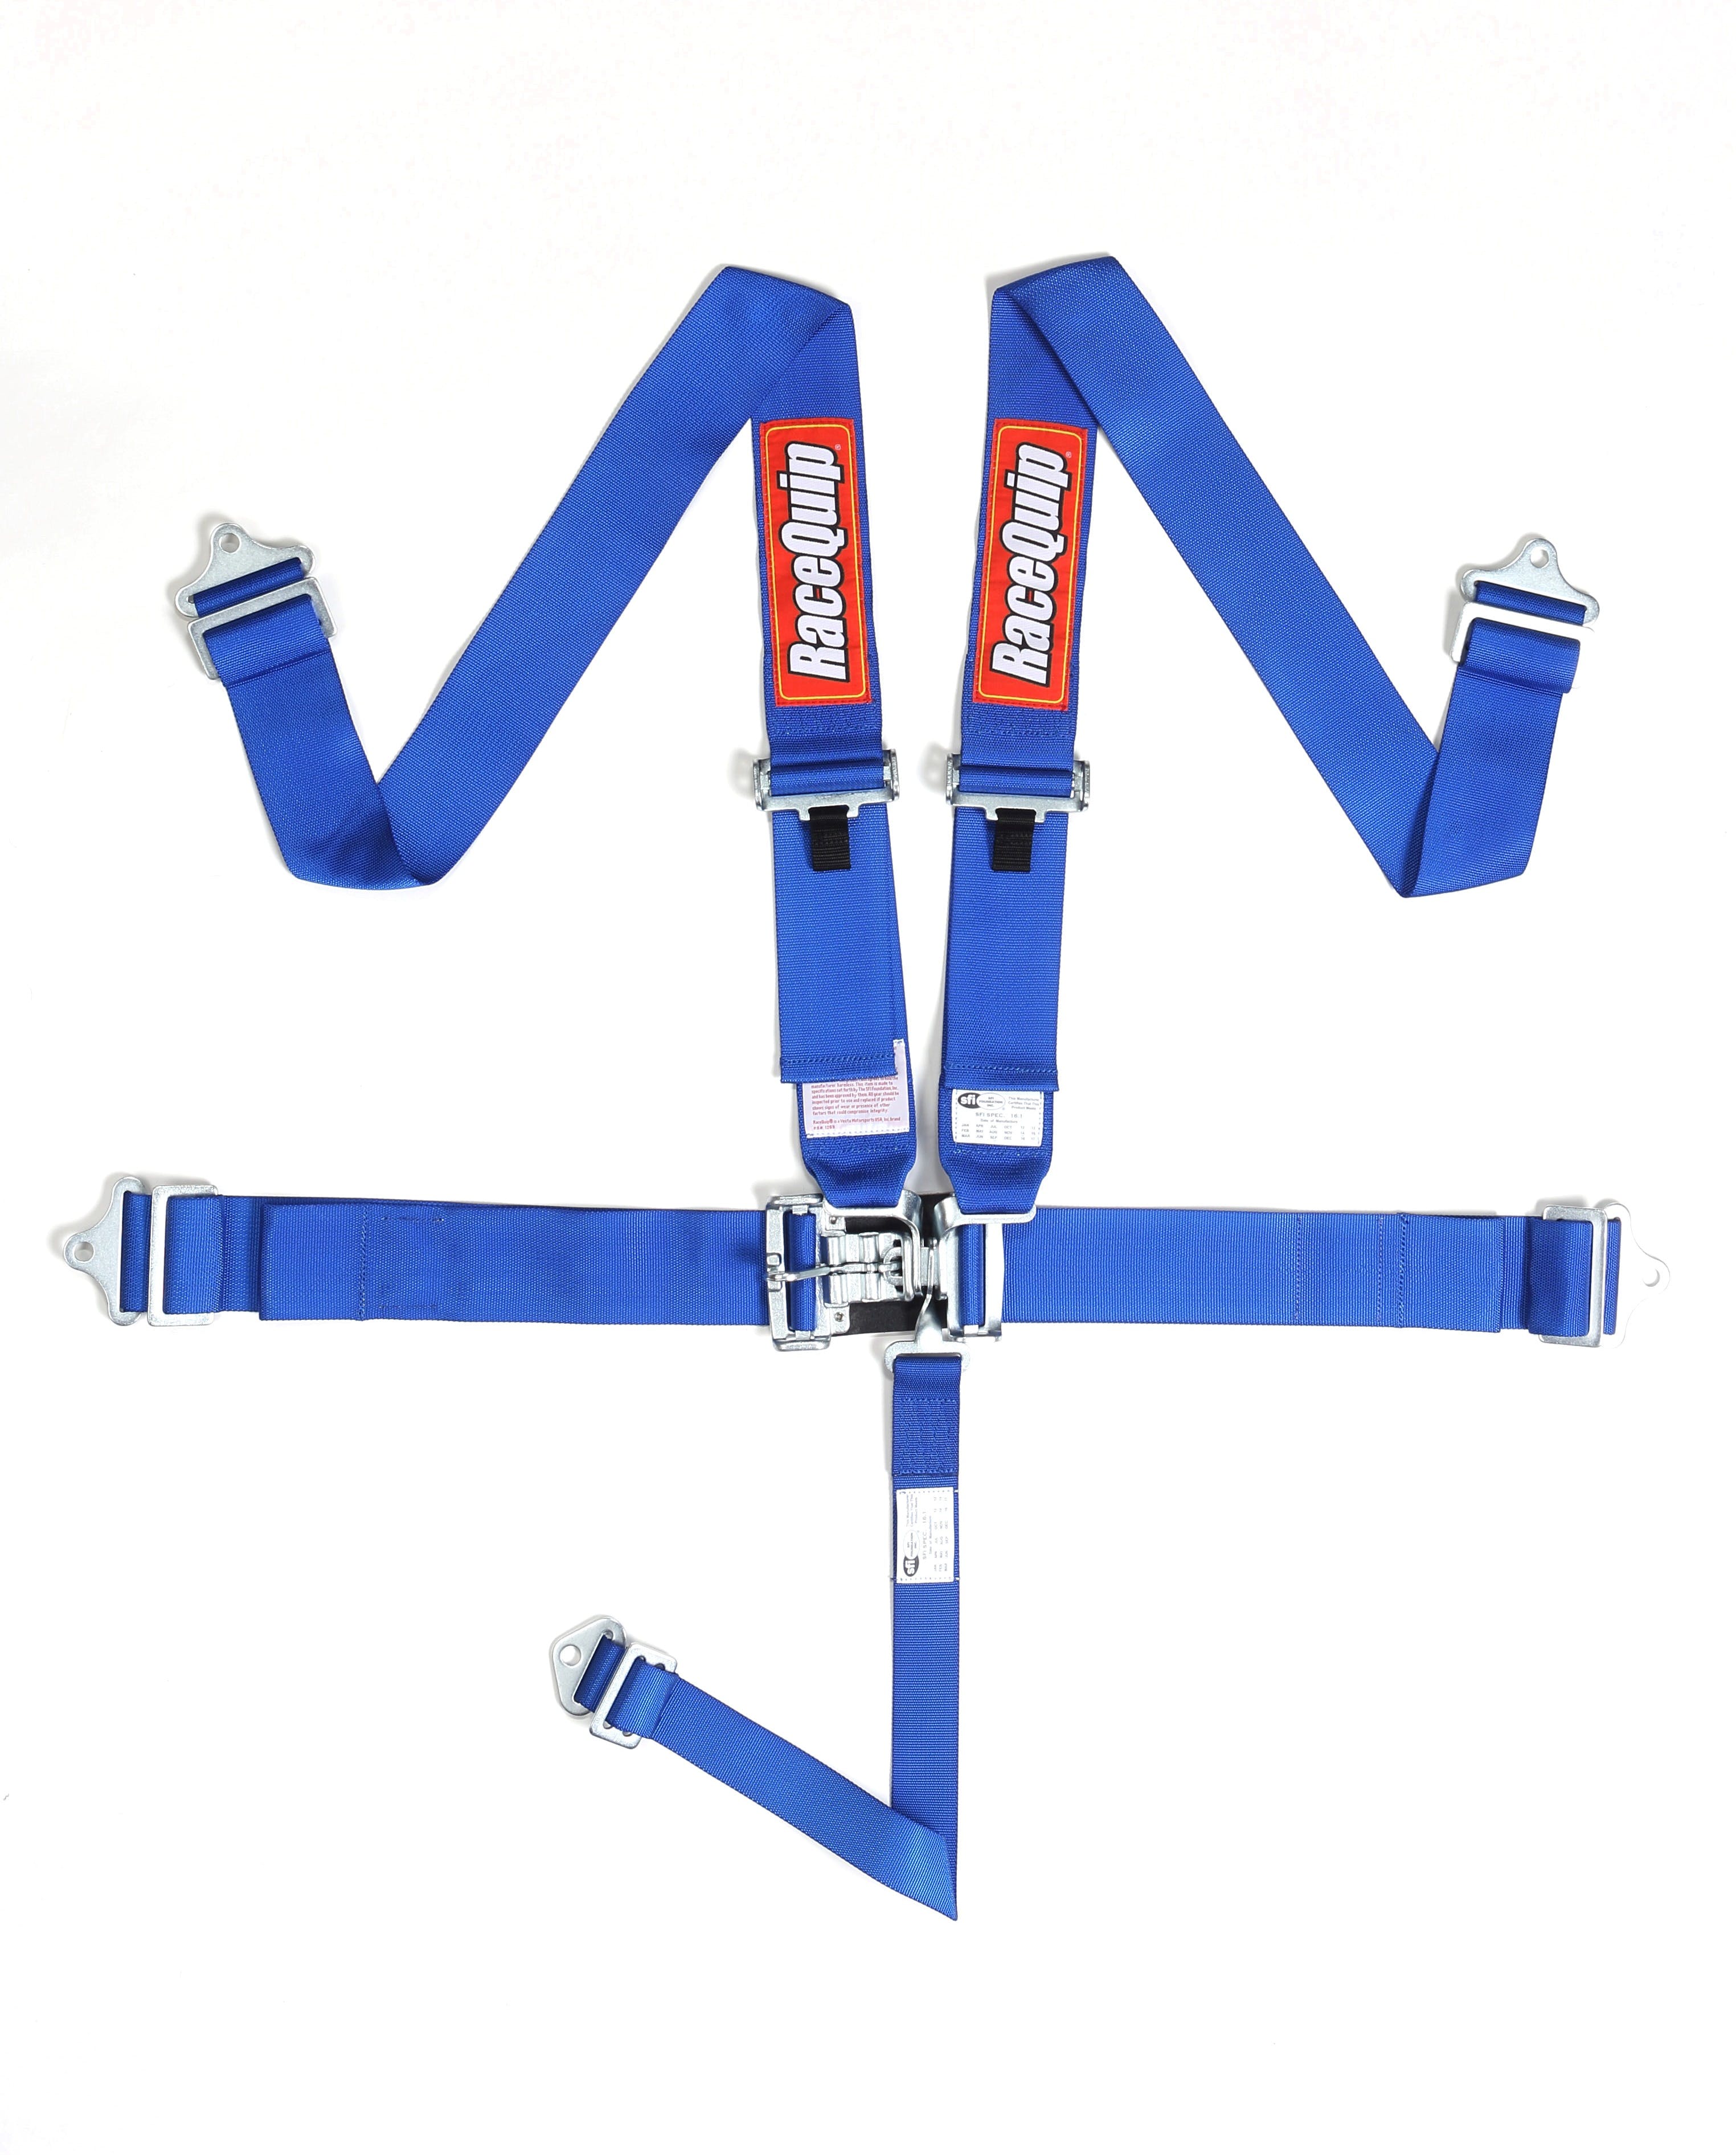 RaceQuip 711021 SFI 16.1 Latch and Link 5-Point Racing Harness Set (Blue)